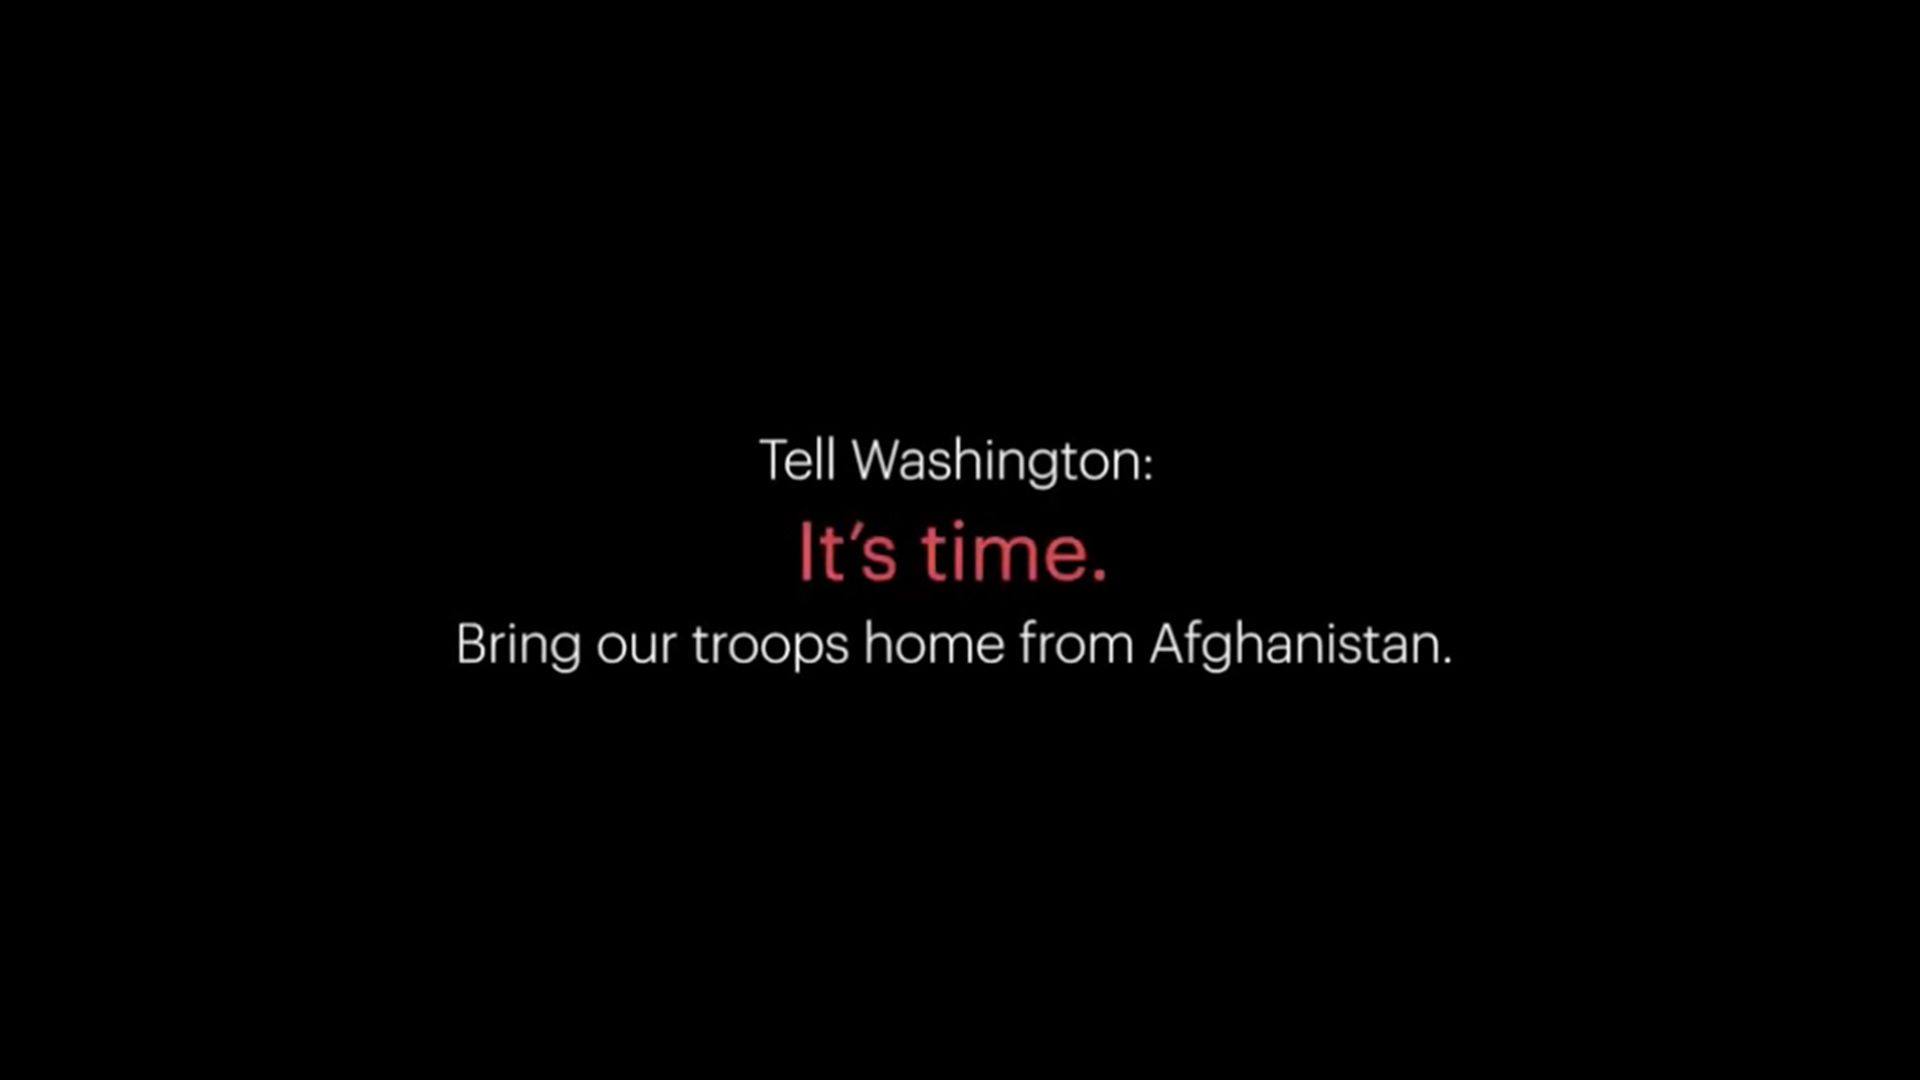 Screenshot from an ad campaign that reads: "Tell Washington: It's time to bring our troops home"